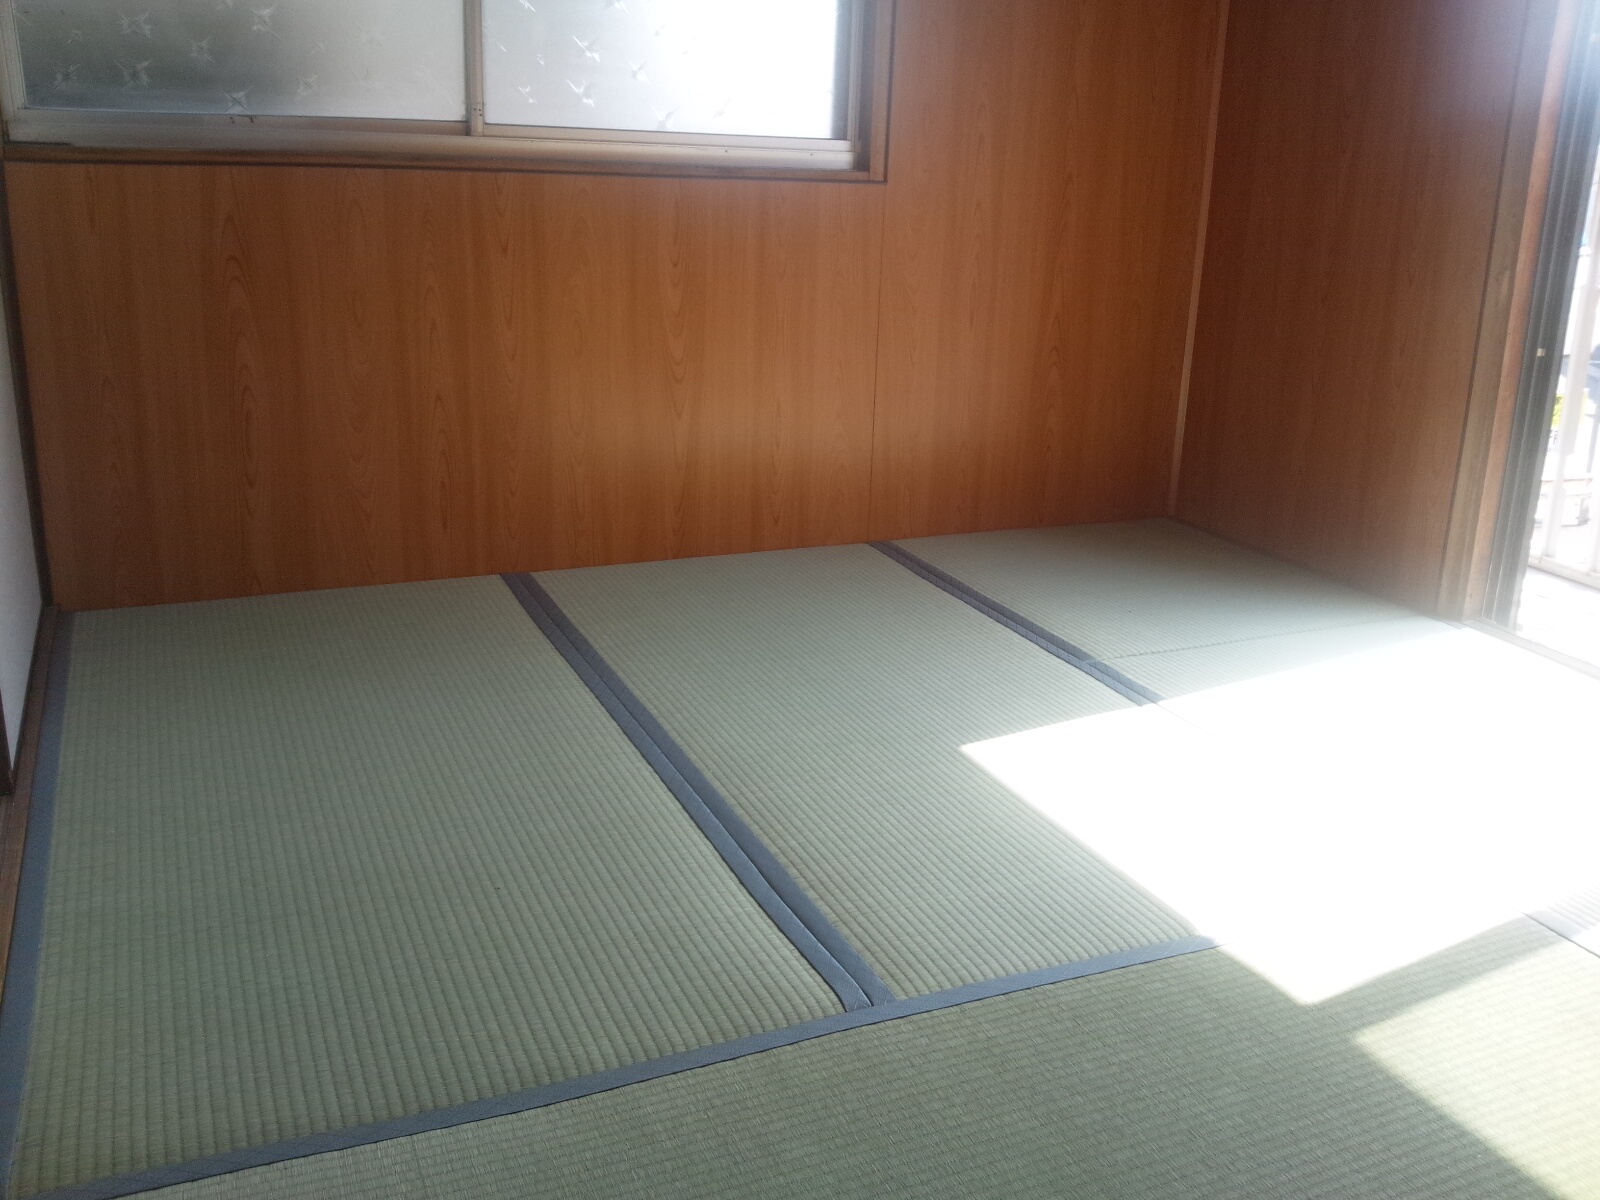 Other room space. Good per sun